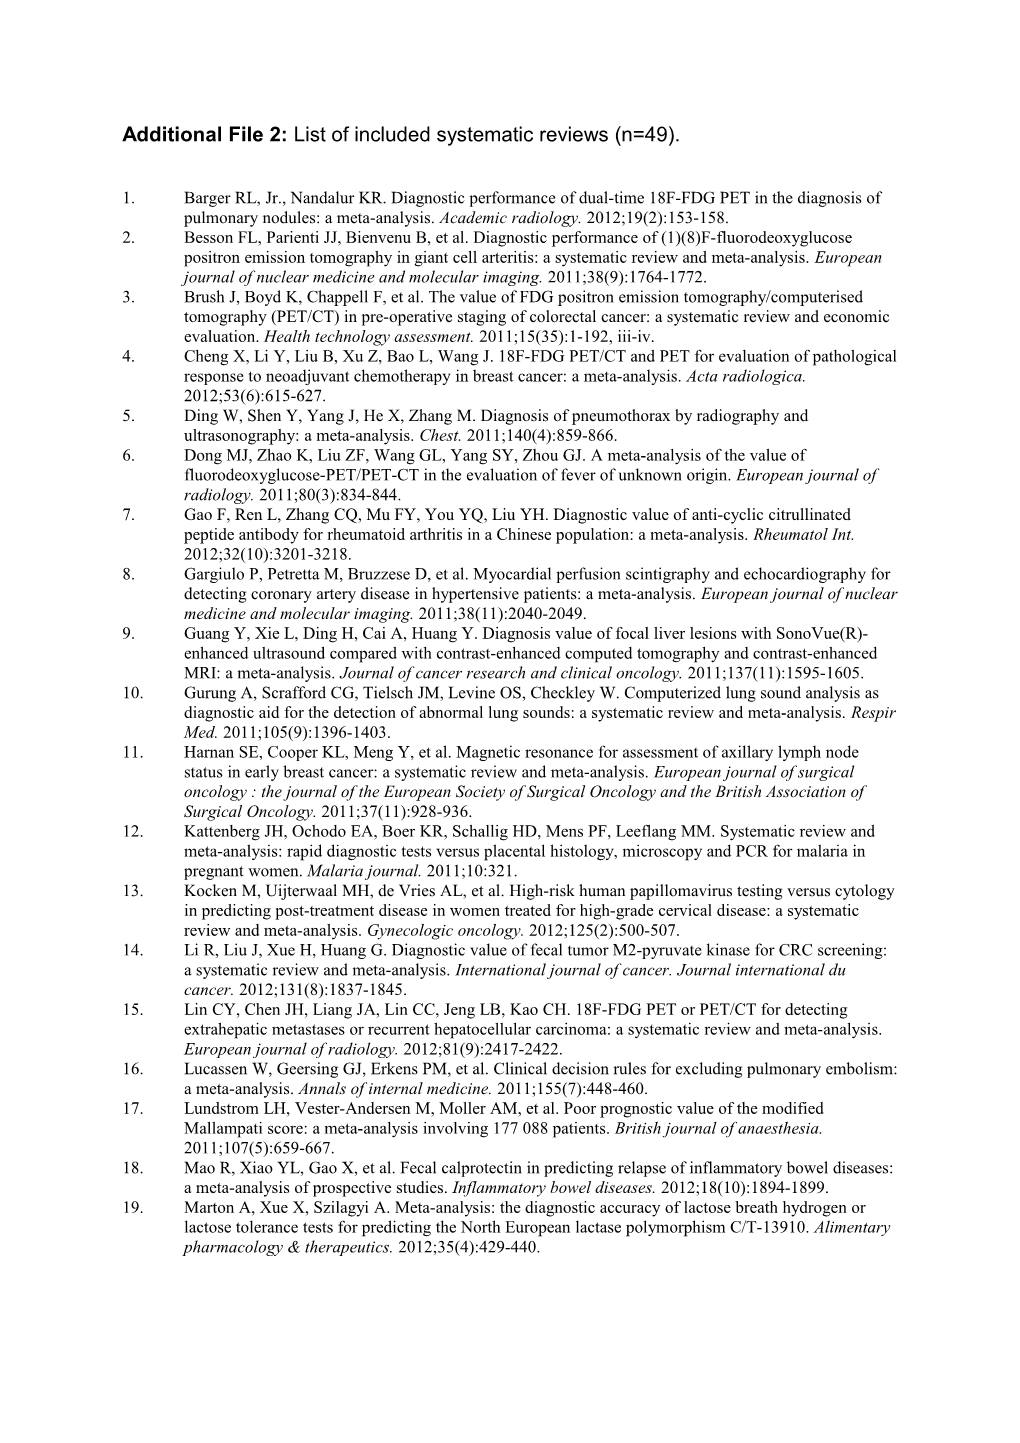 Additional File2: List of Included Systematic Reviews (N=49)